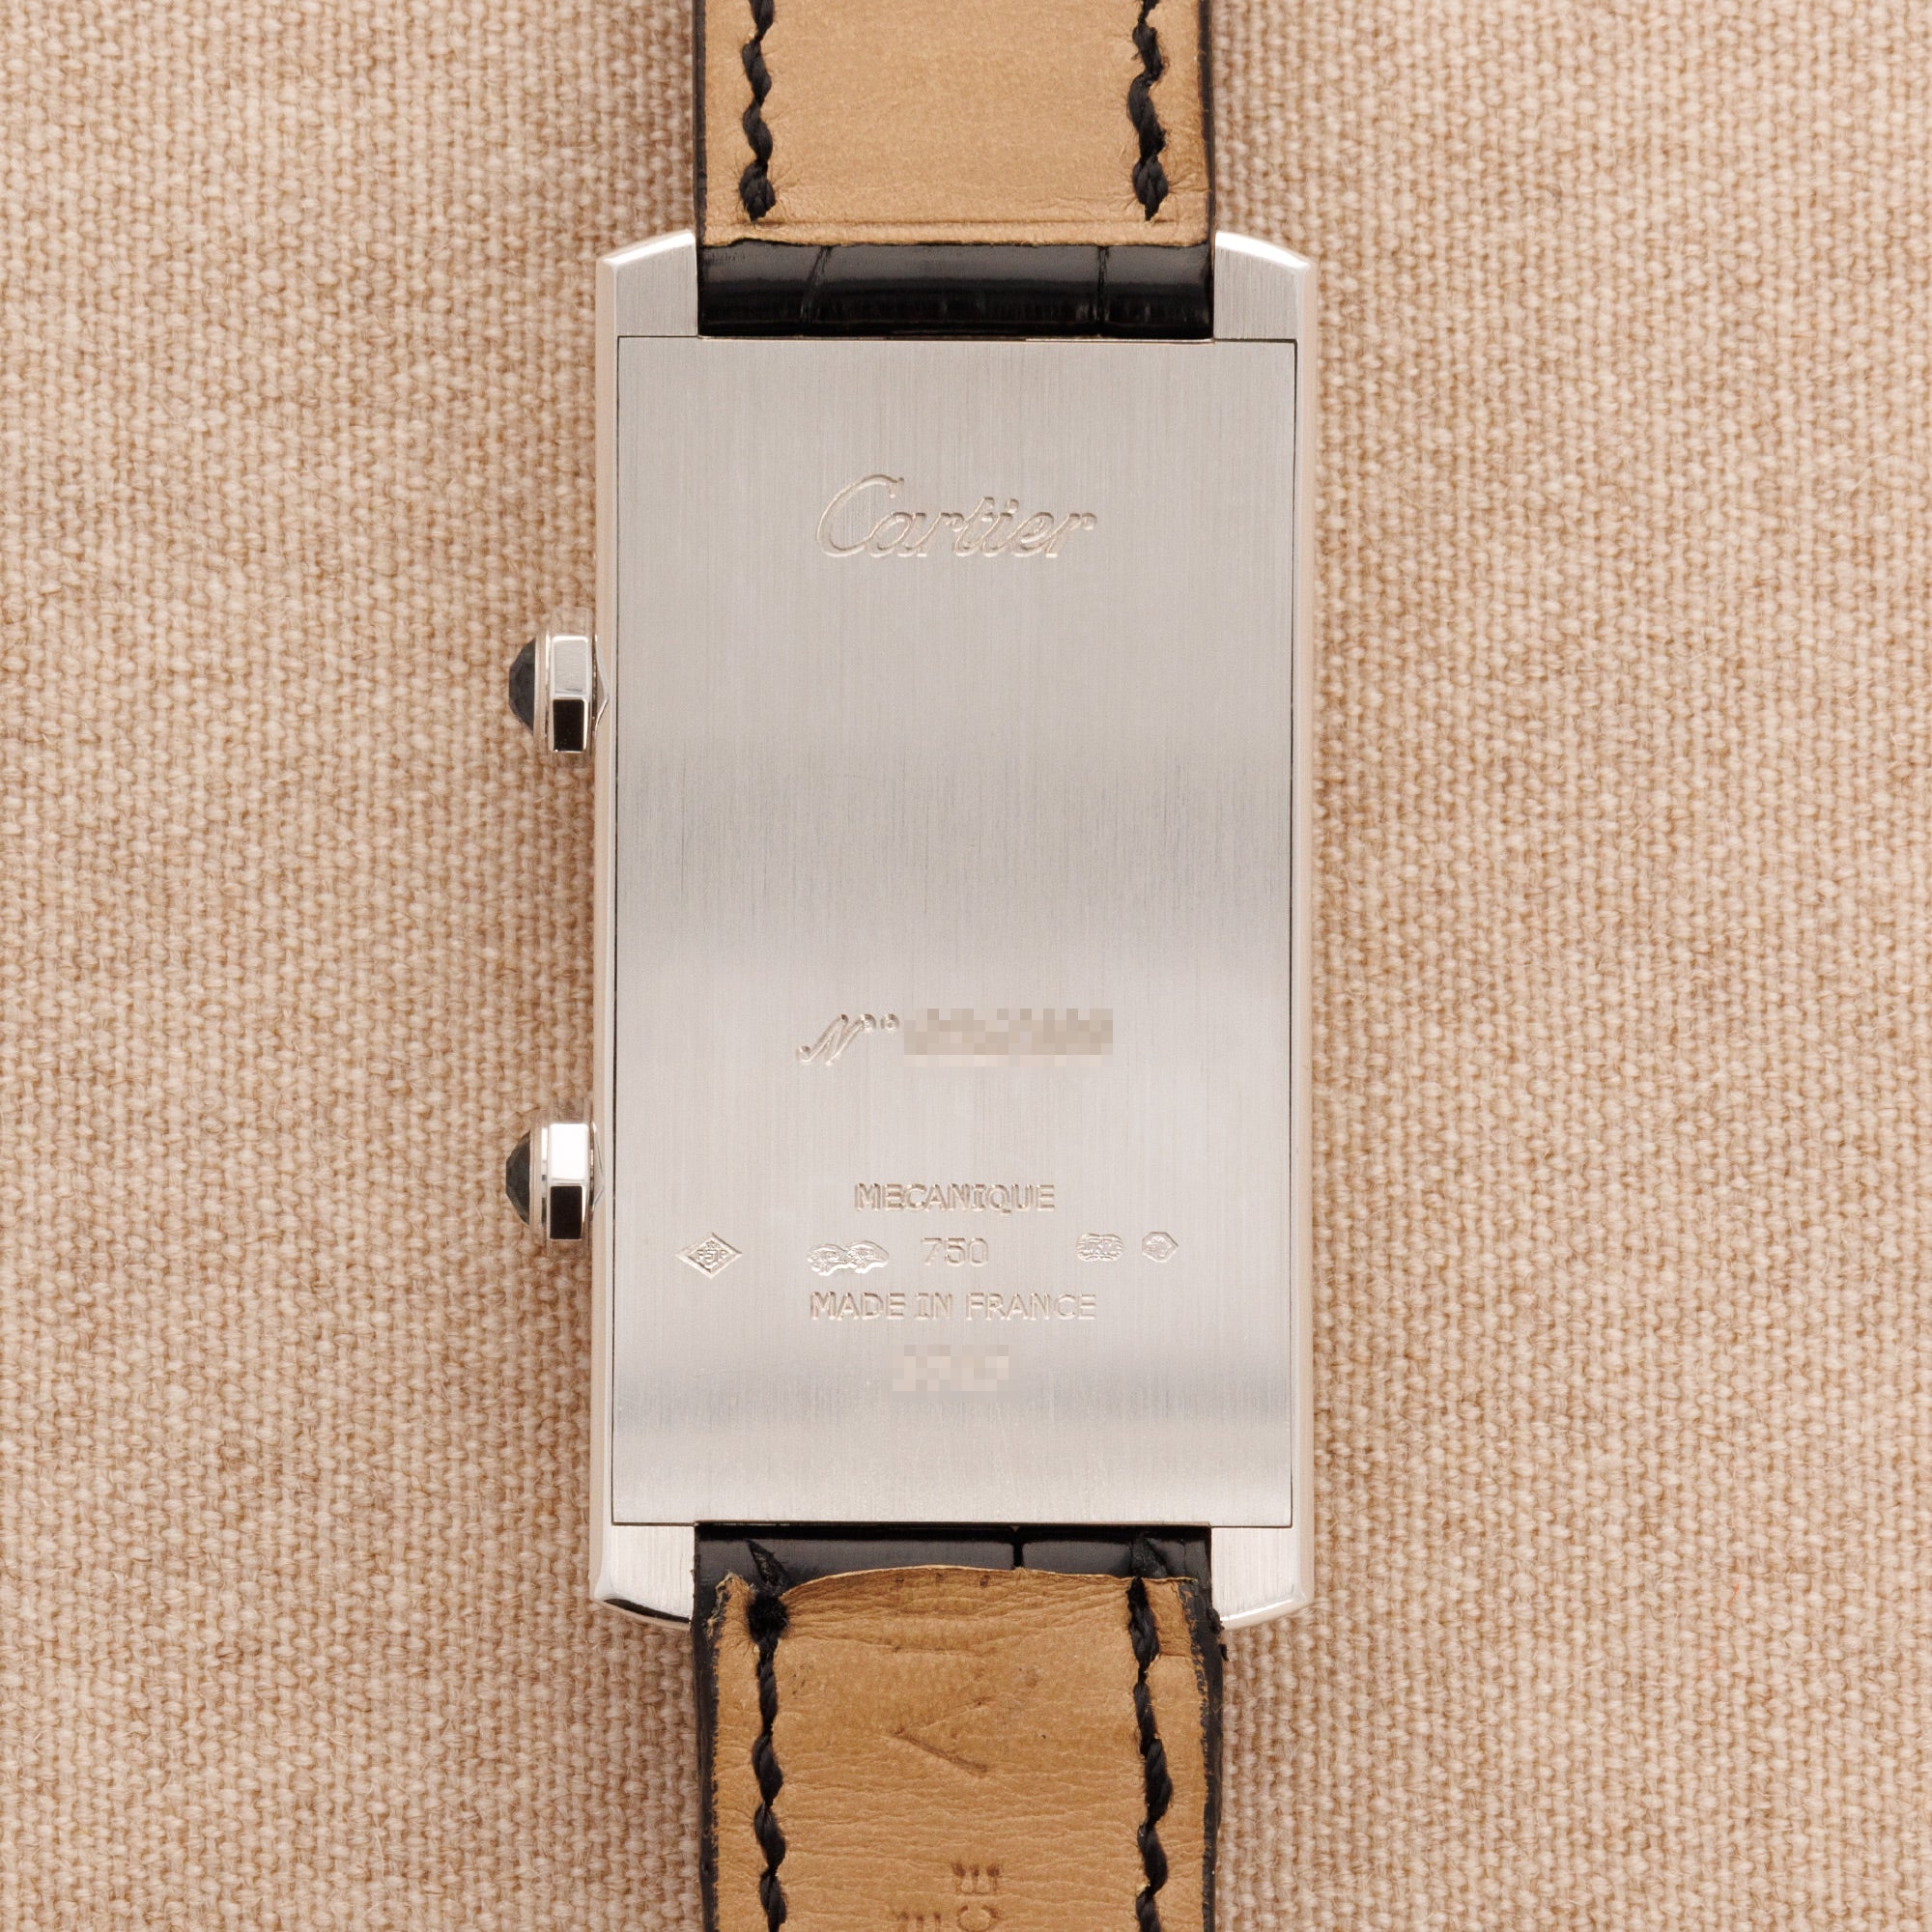 Cartier - Cartier White Gold Cintree Dual Time Watch Ref. 2767 with Chinese Characters - The Keystone Watches